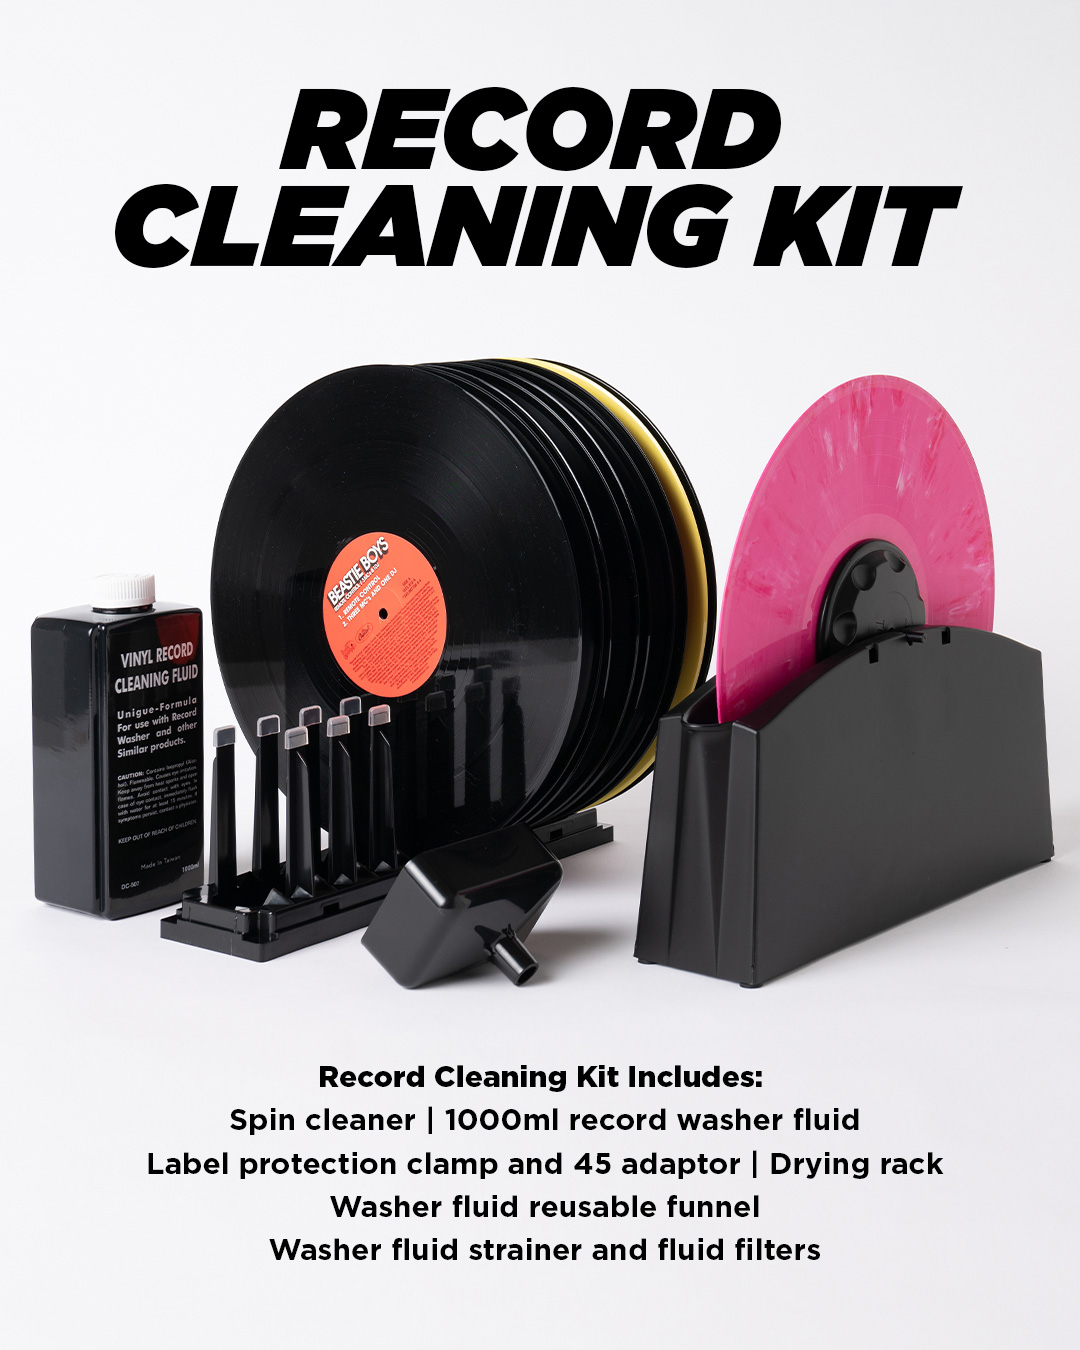 Vinyl Record Cleaning Kit (Manual Spinning Cleaner)  Dc-513 Washer